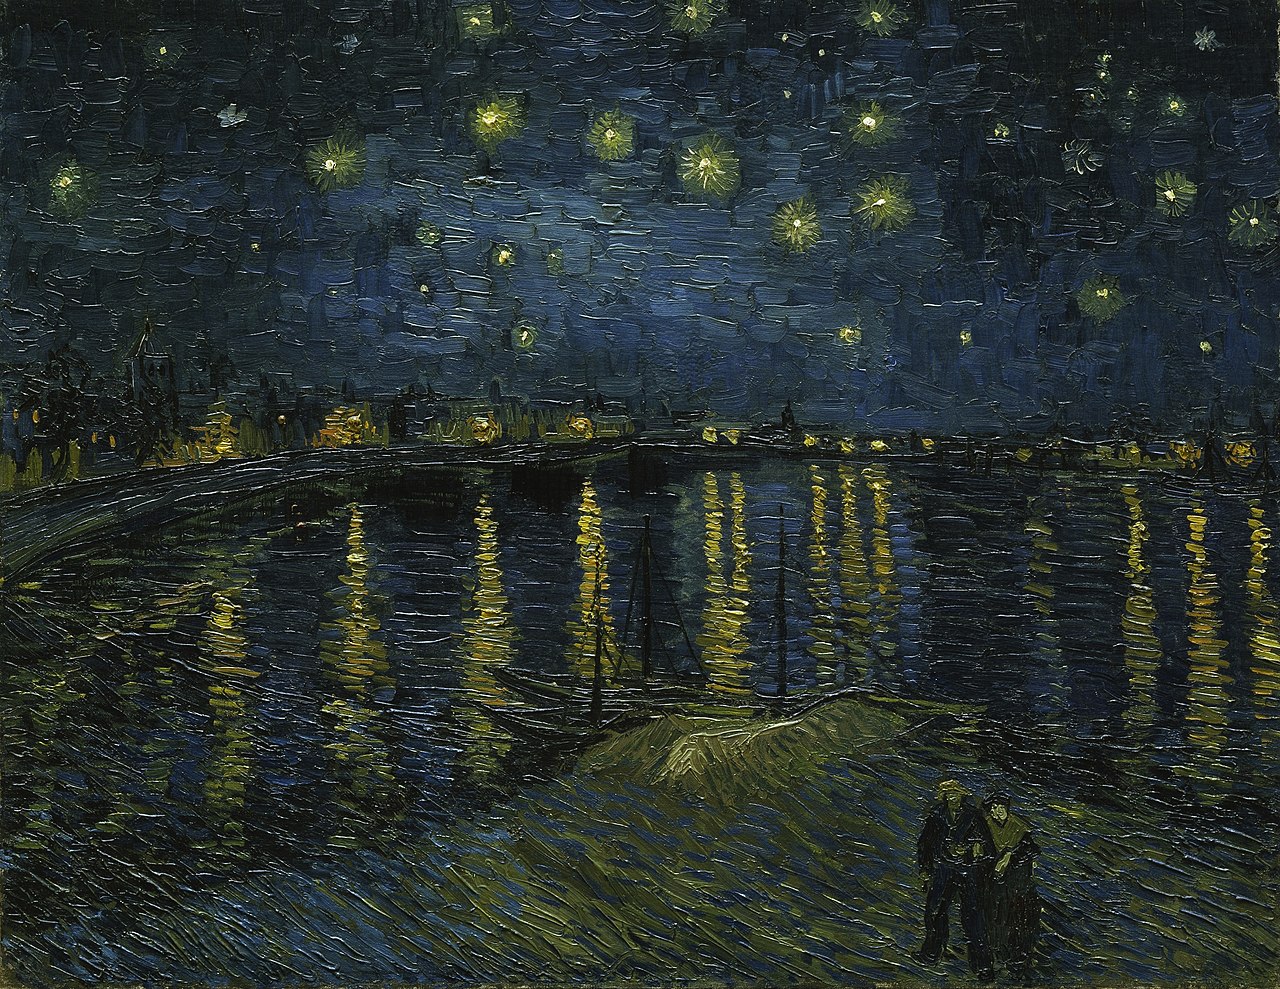 A view of a dark starry night with bright stars shining over the River Rhone. Across the river distant buildings with bright lights shining are reflected into the dark waters of the Rhone.